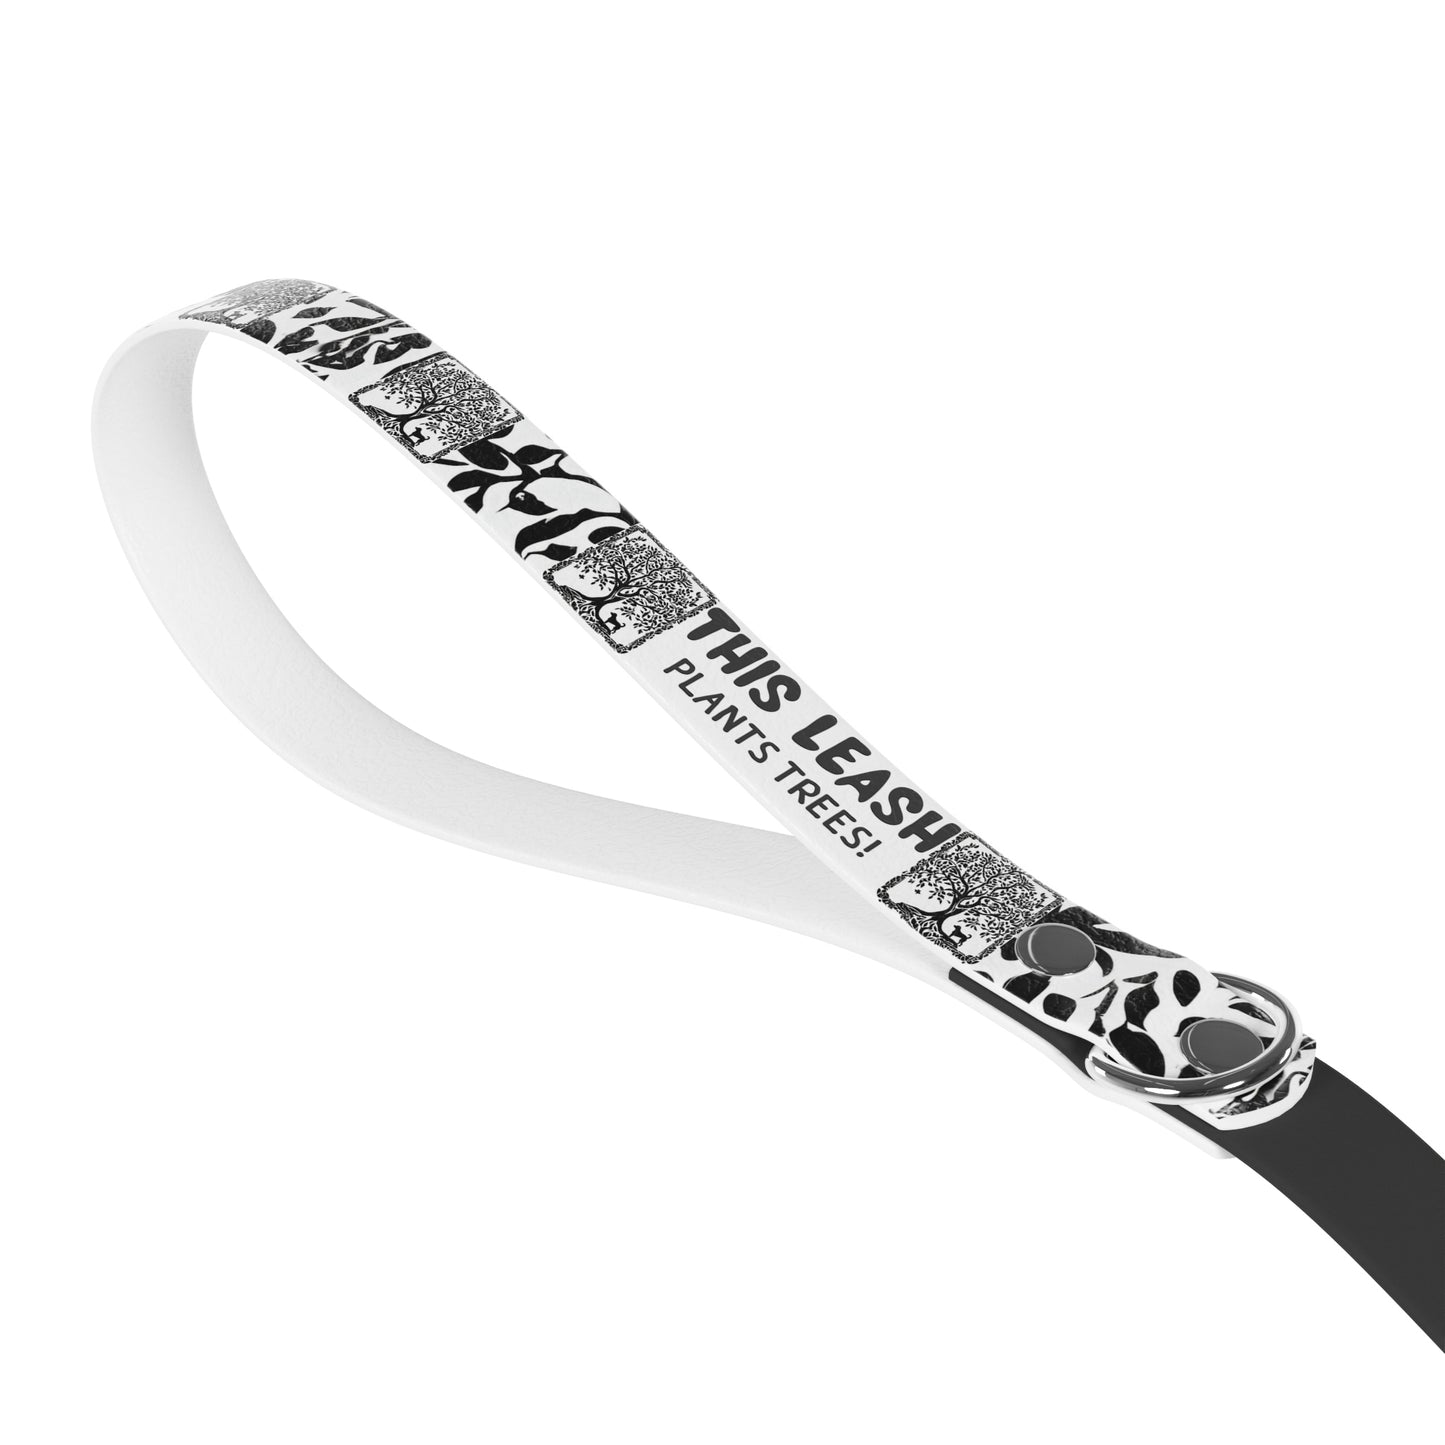 Dog Leash, Black and White Floral Pattern, Recyclable TPU Handle, Ecofriendly